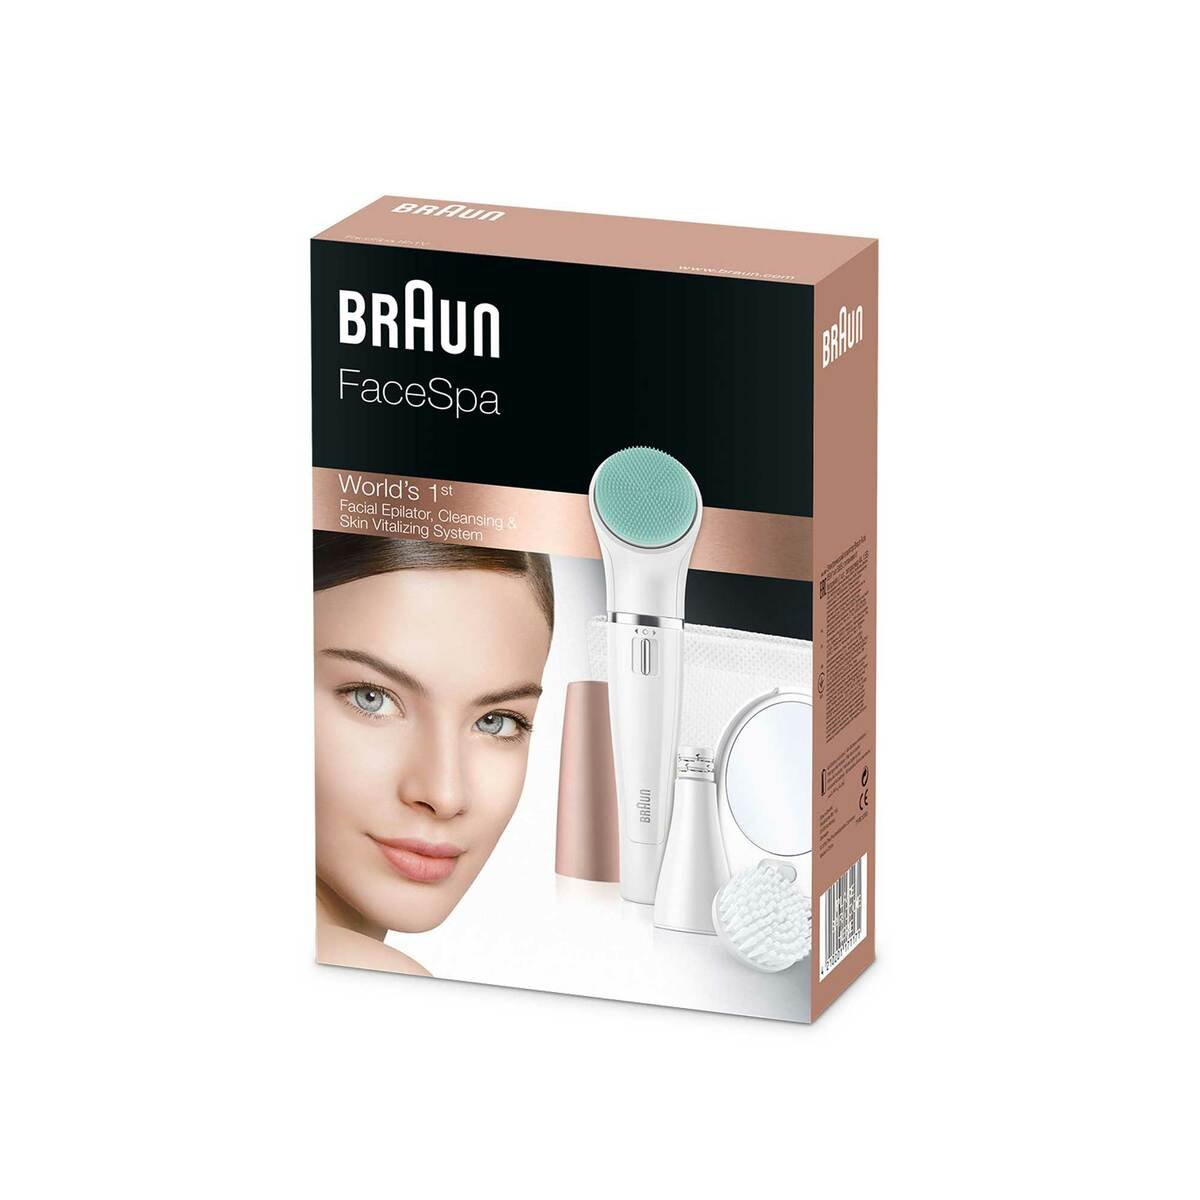 Braun FaceSpa 851V 3-in-1 facial epilating, cleansing & vitalization system